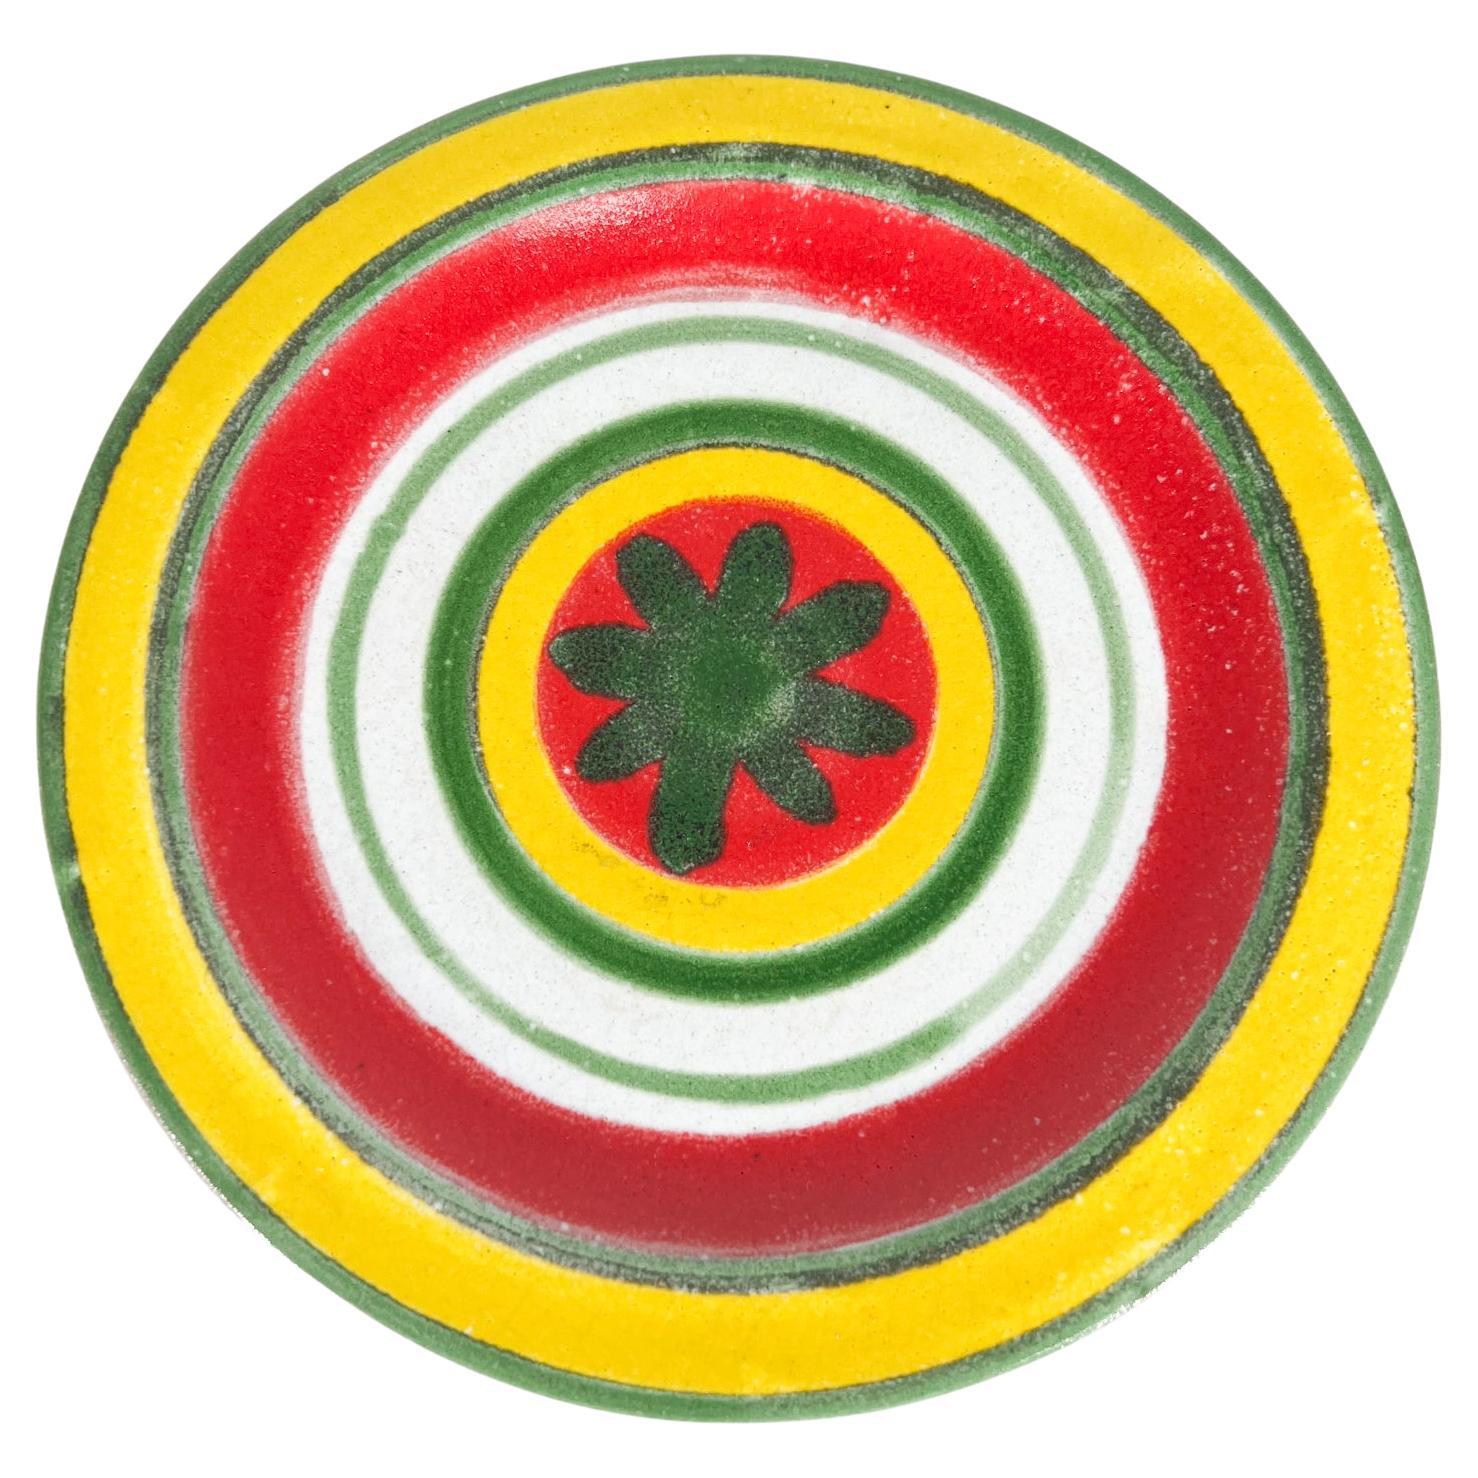 1960s Desimone Ceramic Pottery Italy Art Plate Yellow Red Green Hand Painted